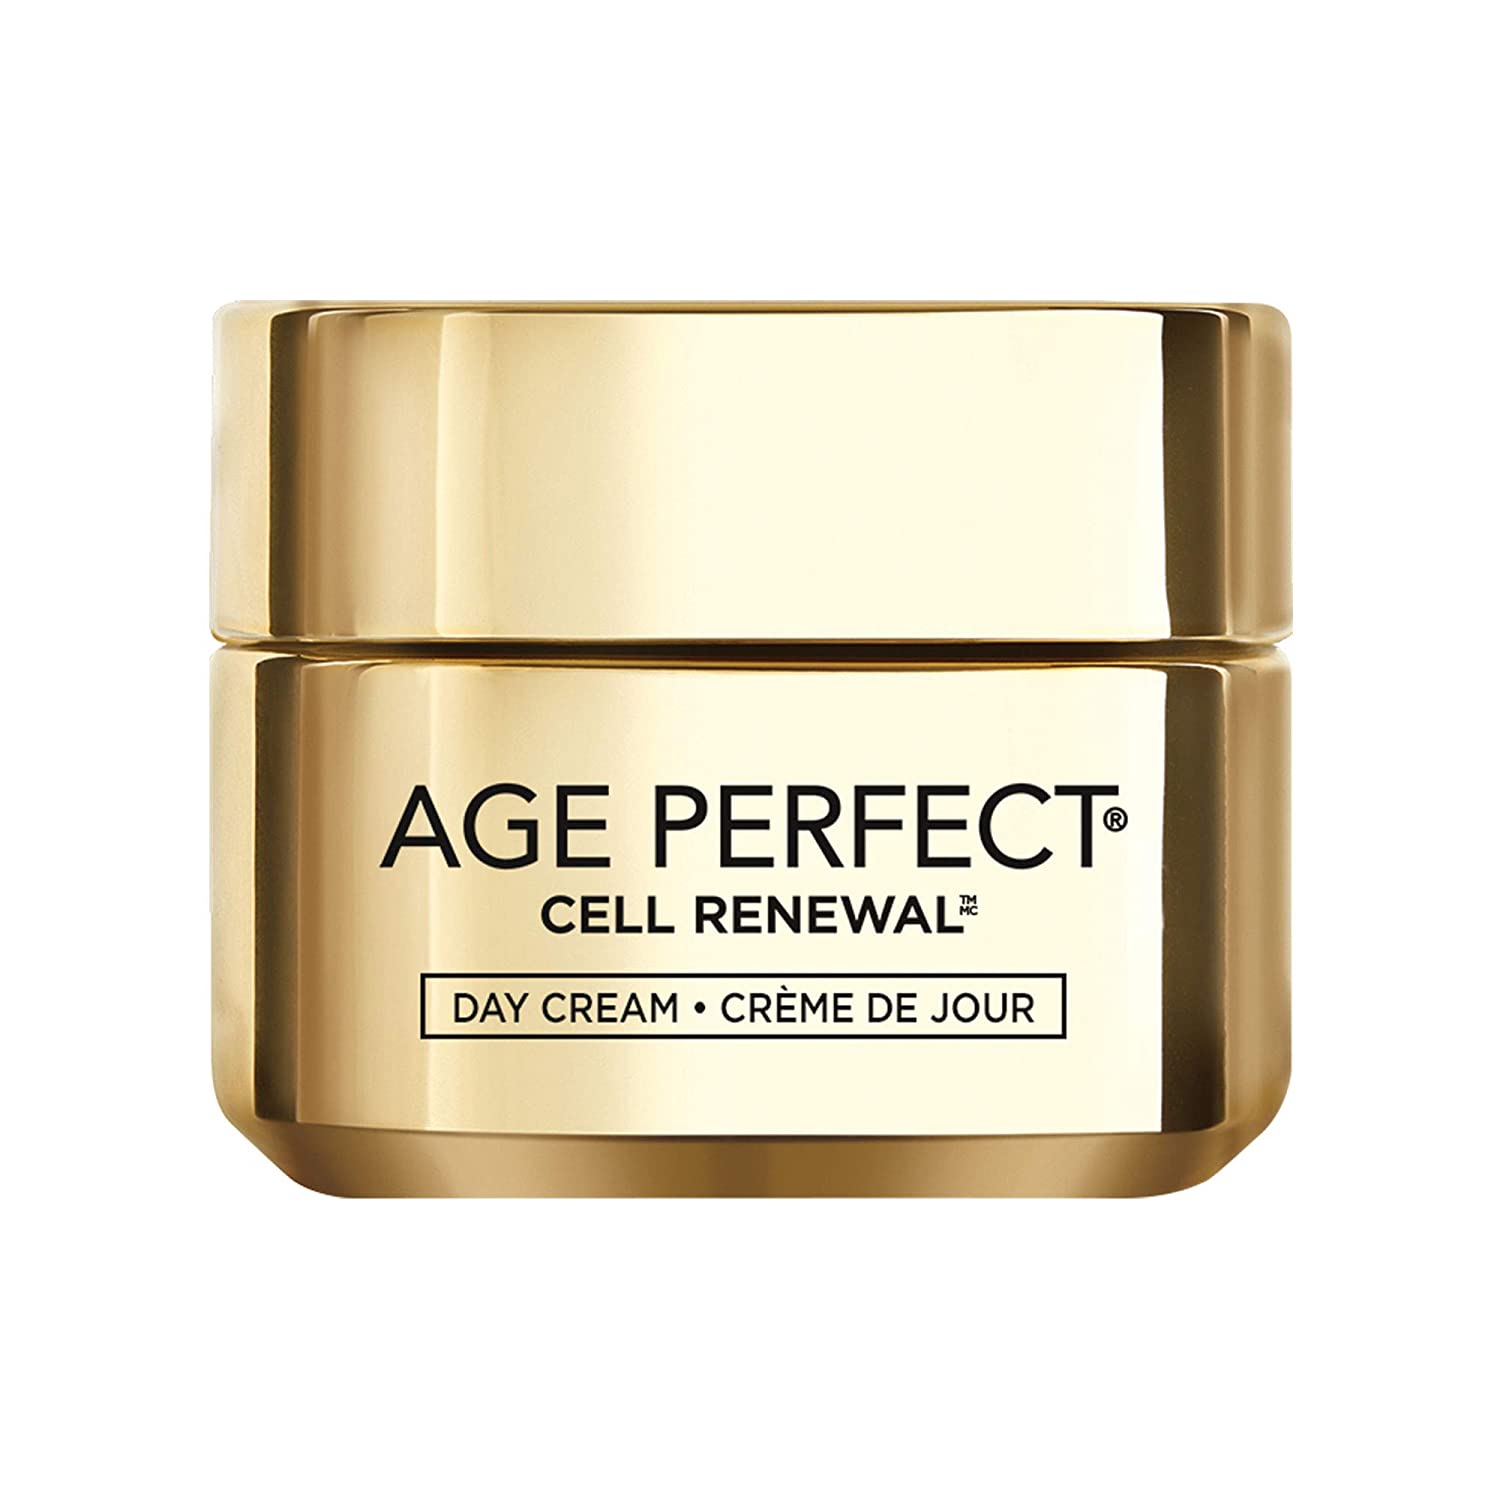 1.7-Oz L'Oreal Paris Age Perfect Cell Renewal Skin Renewing Day Cream $12.05 w/ S&S + Free Shipping w/ Amazon Prime or Orders $25+